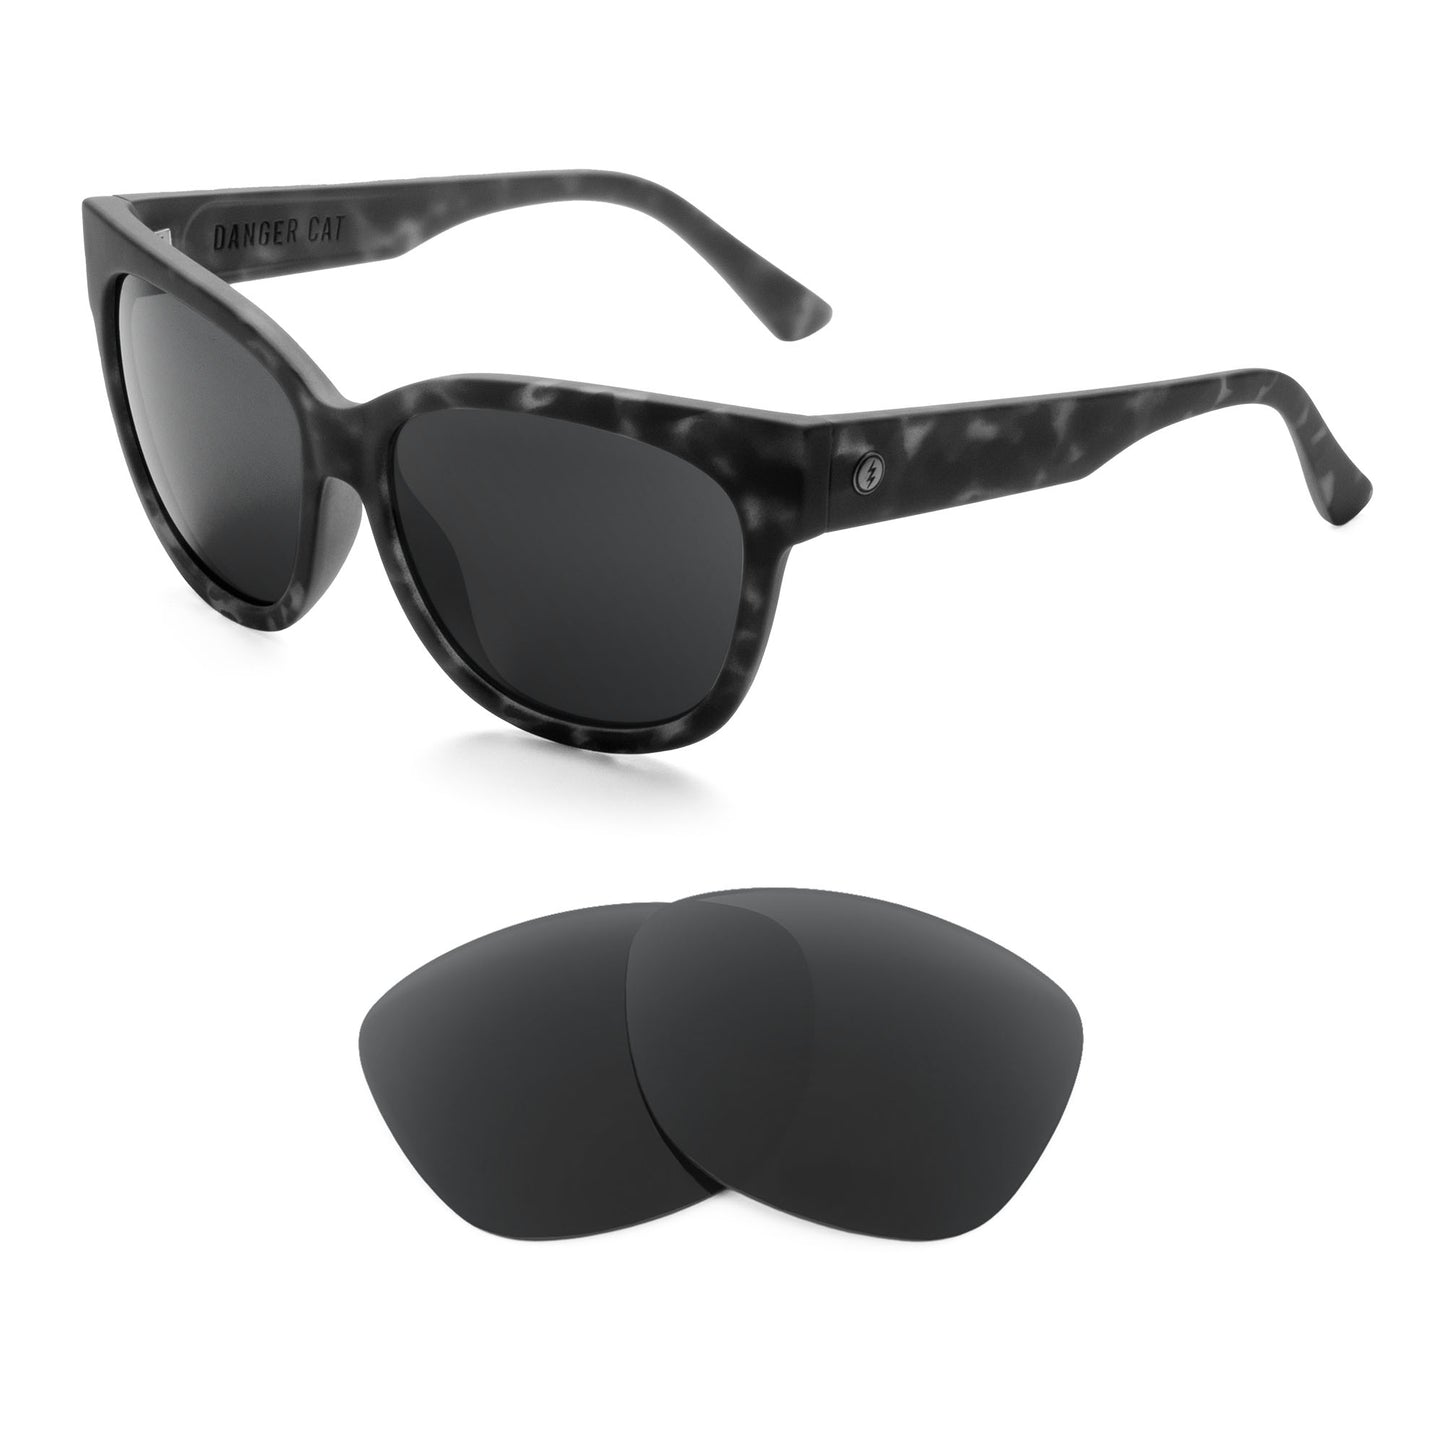 Electric Danger Cat sunglasses with replacement lenses